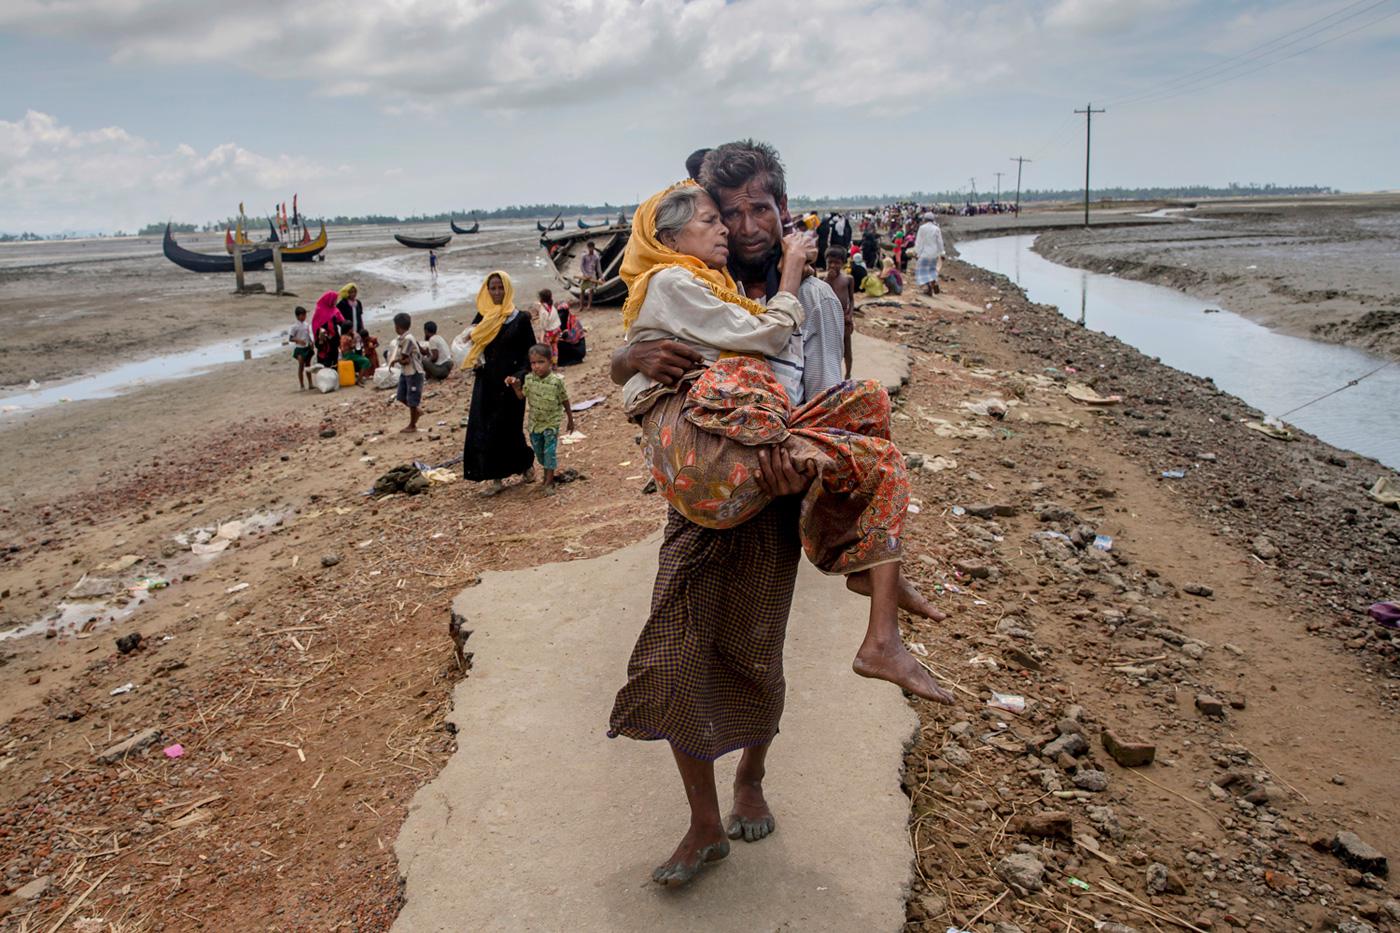 Abdul Kareem, a Rohingya Muslim, carries his mother, Alima Khatoon, to a refugee camp after crossing from Burma into Bangladesh on Sept. 16, 2017.